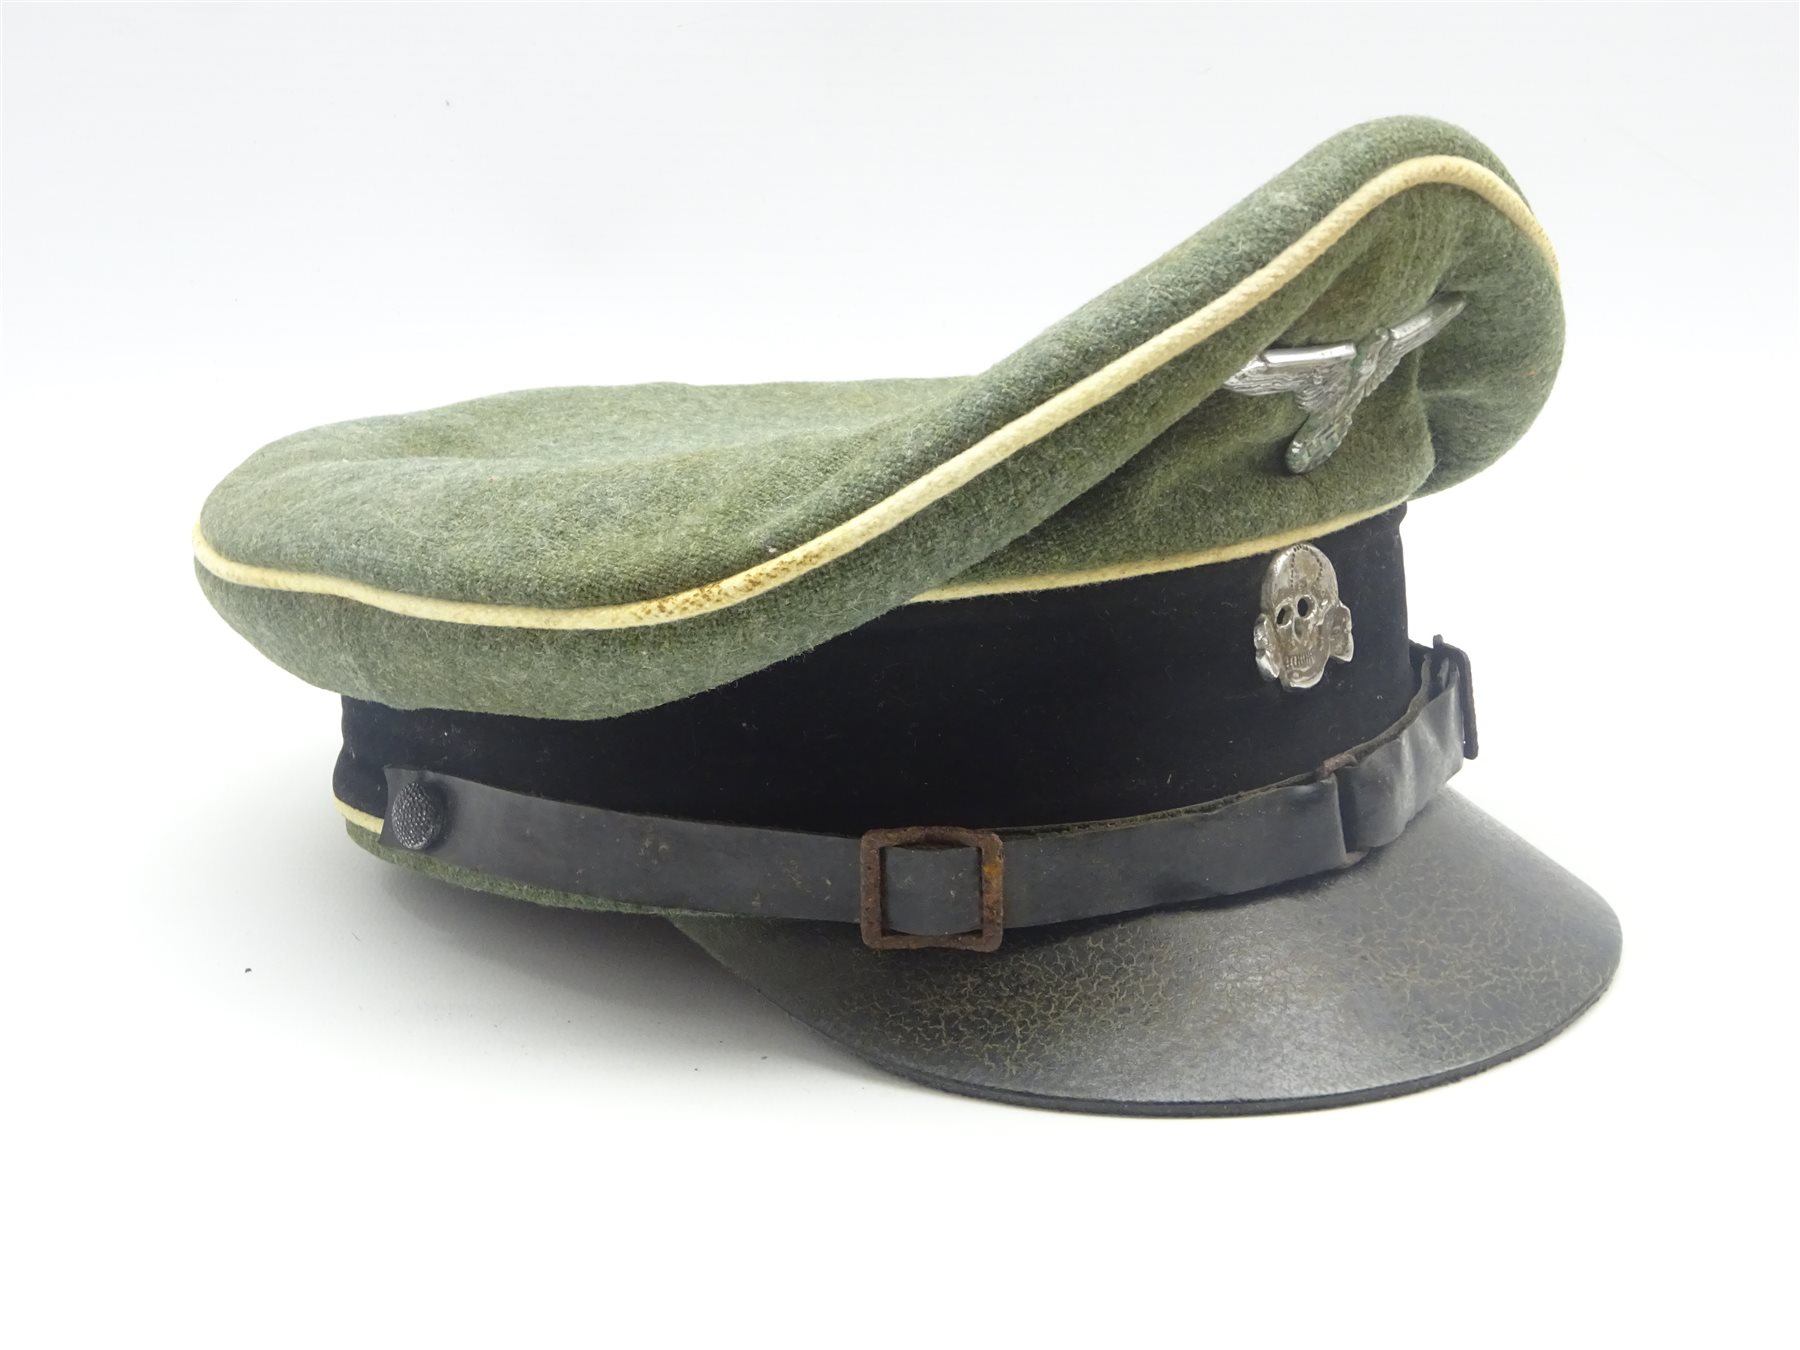 WW2 German Waffen-SS officer's peaked cap with metal eagle ...